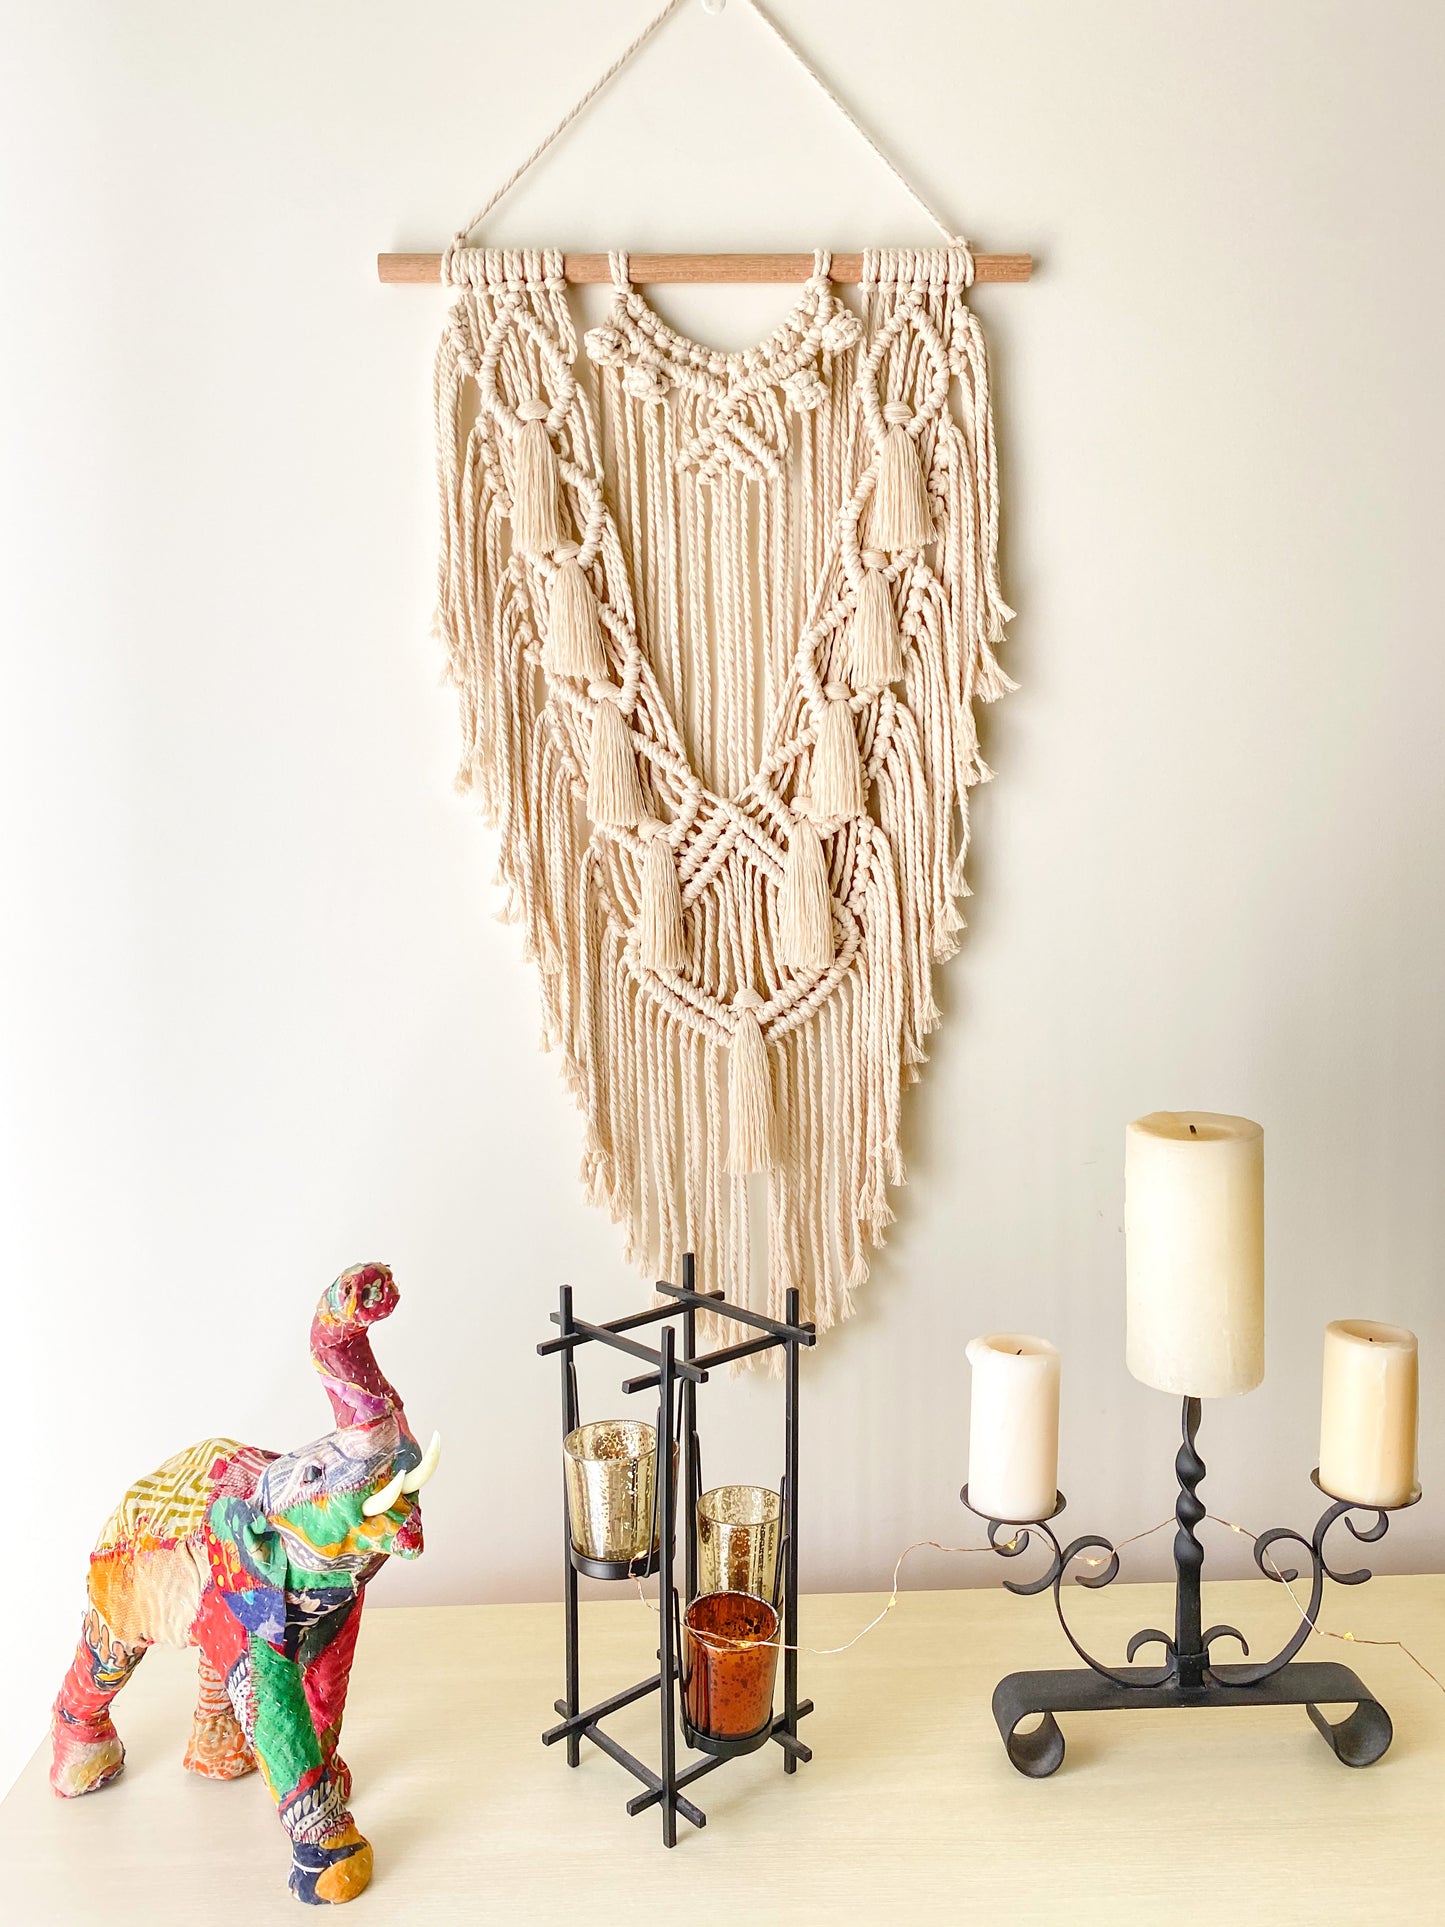 Natural white macrame wall hanging with tassels hanged on a wall above a table styled with two candles holders and a fabric elephant